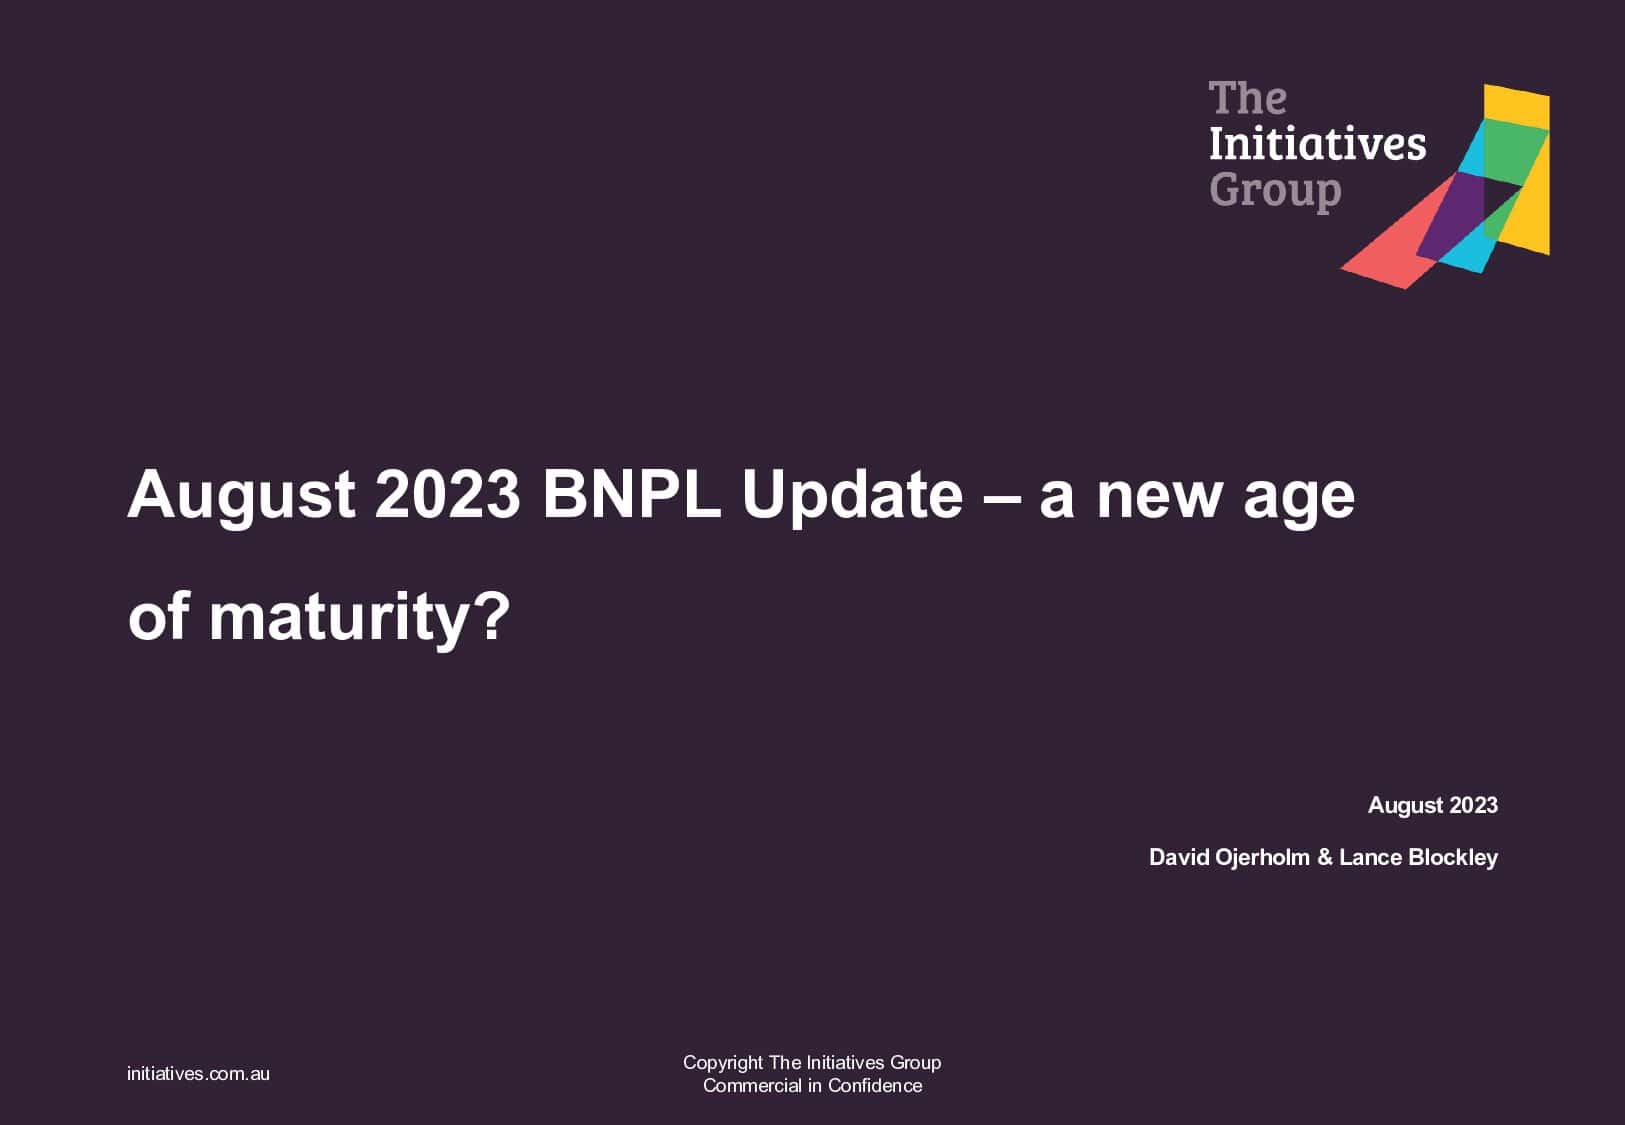 The Initiatives Group BNPL Update 202308_pages-to-jpg-0001